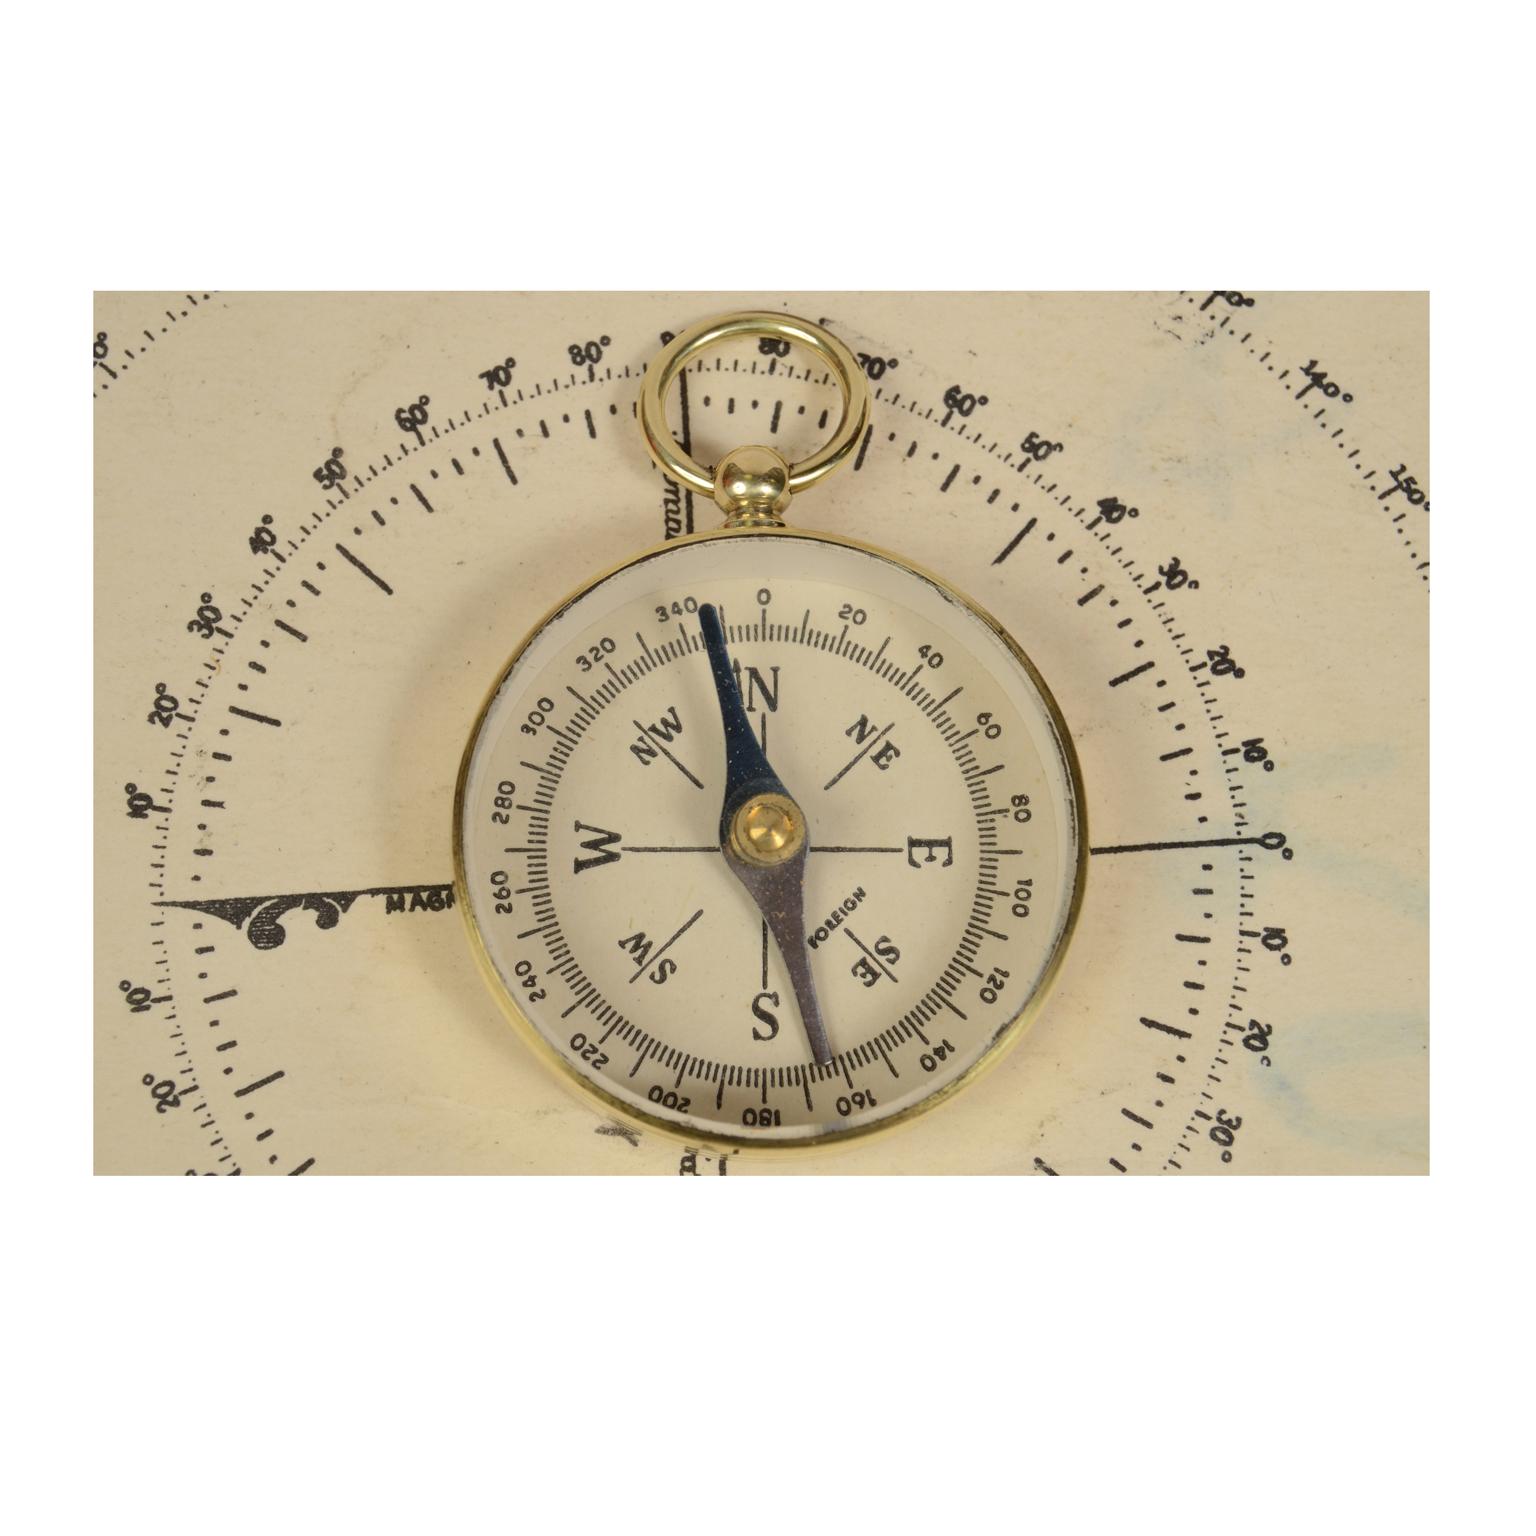 Small brass travel compass, eight winds compass card on paper complete with goniometric circle. English manufacture from the 1930s. Excellent condition, fully functional. Diameter cm 3.5, thickness cm 1. 
Shipping is insured by Lloyd's London; our